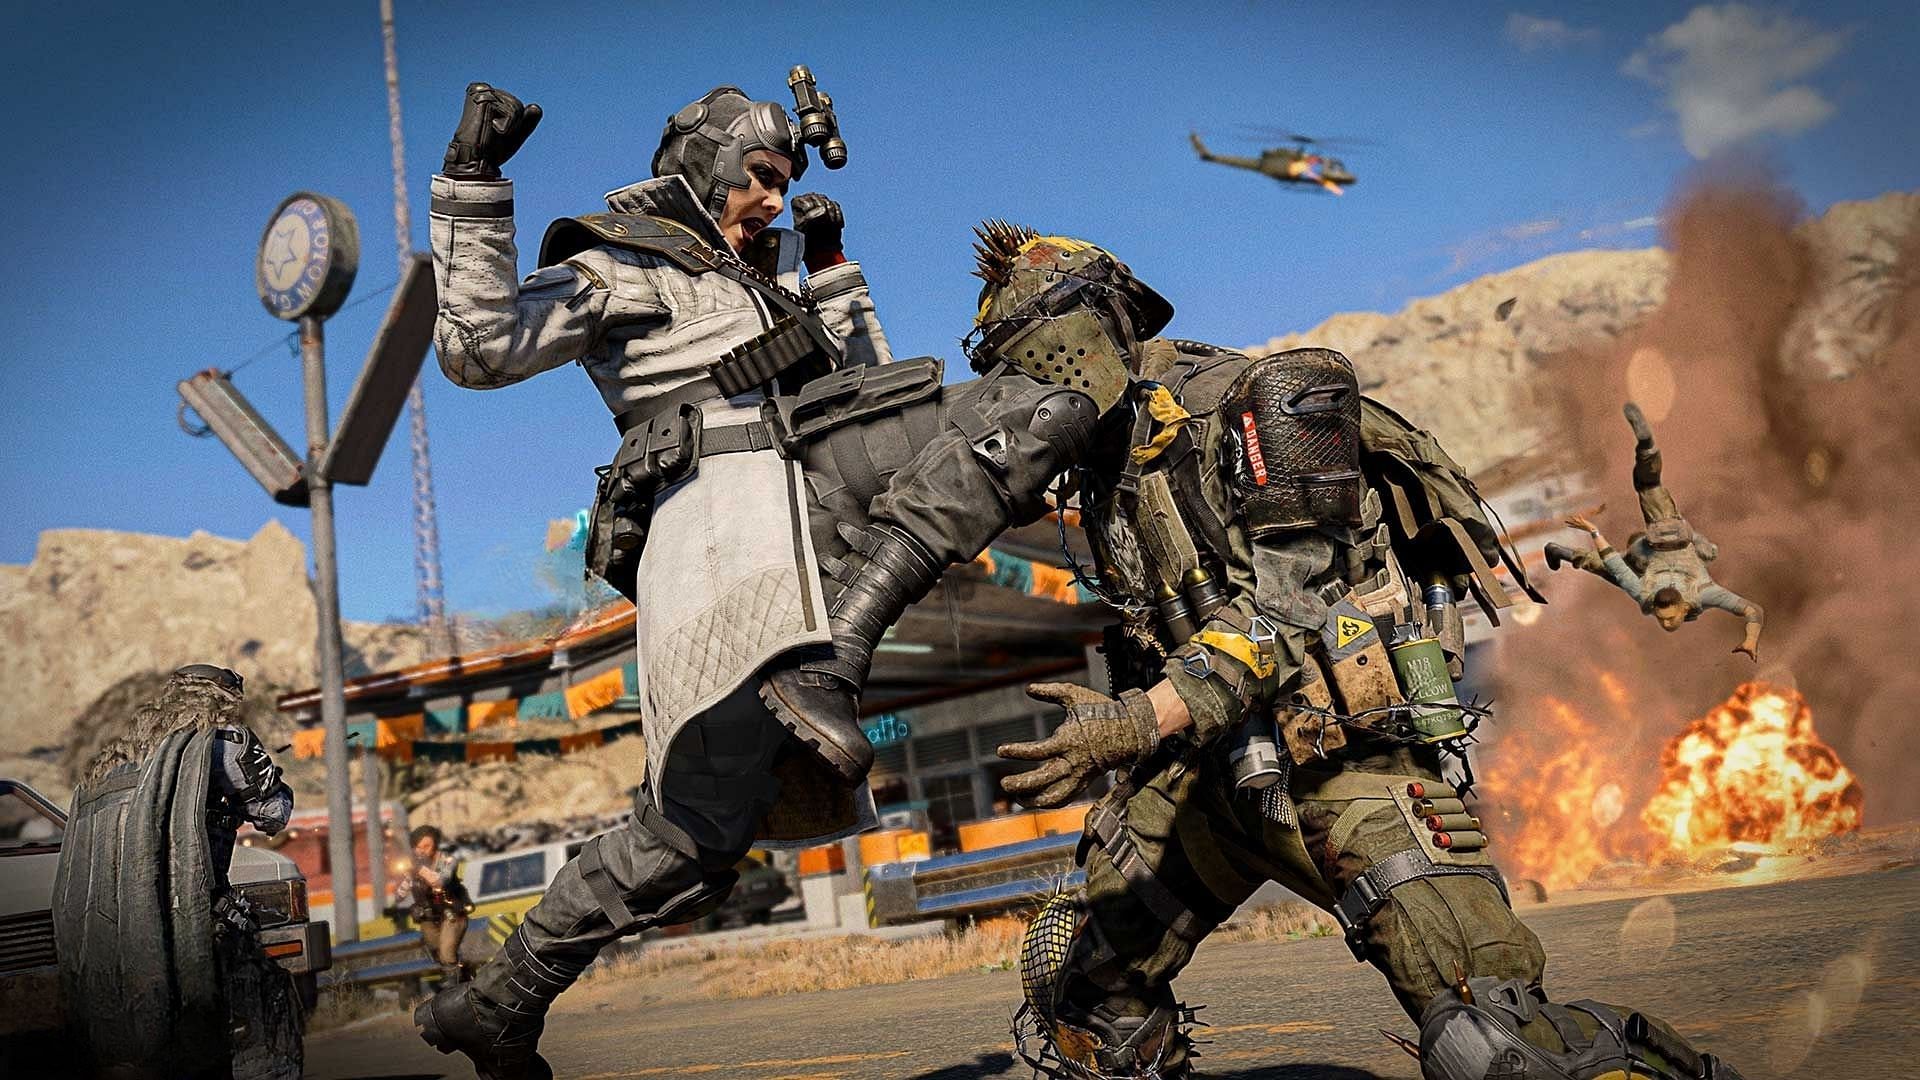 An Operator executing a Finishing Move in Call of Duty